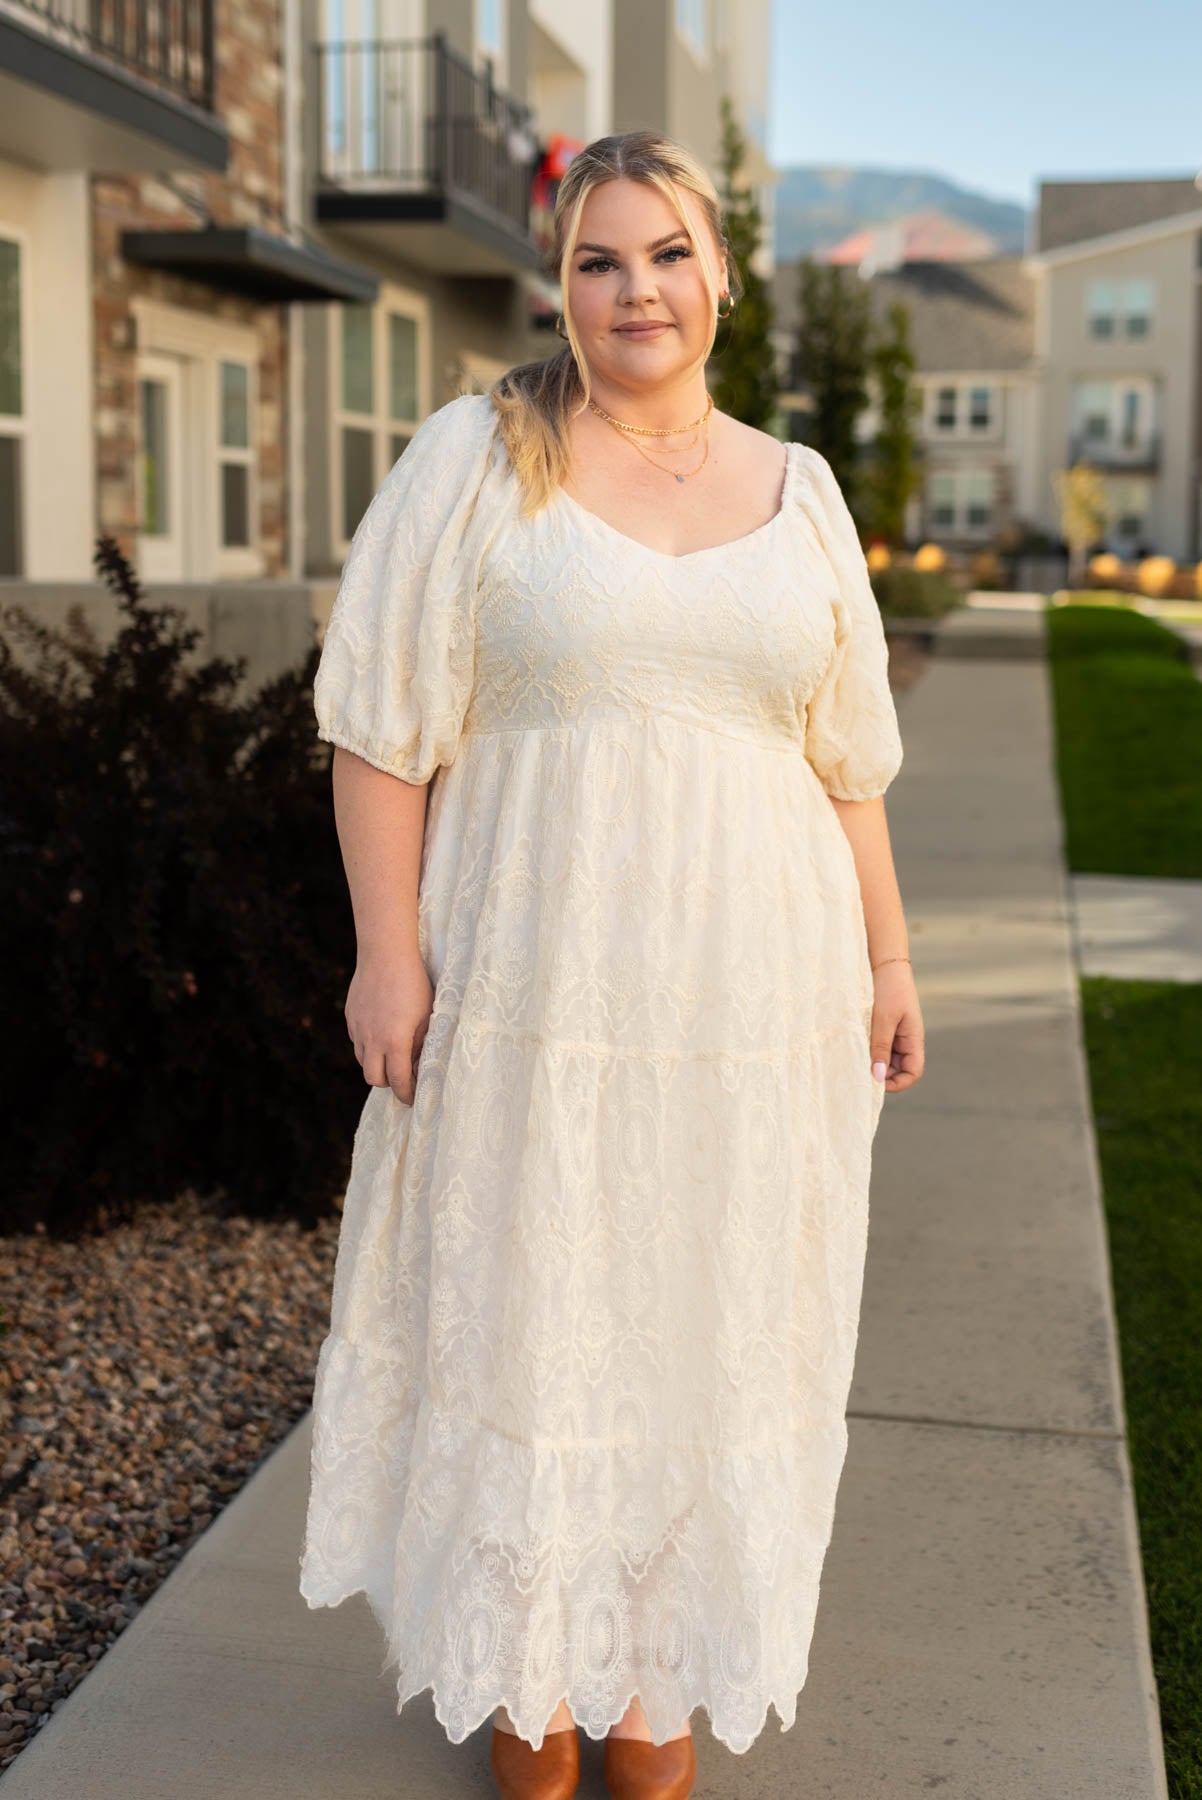 Plus size natural dress with short sleeves, sweetheart neck and smocked bodice